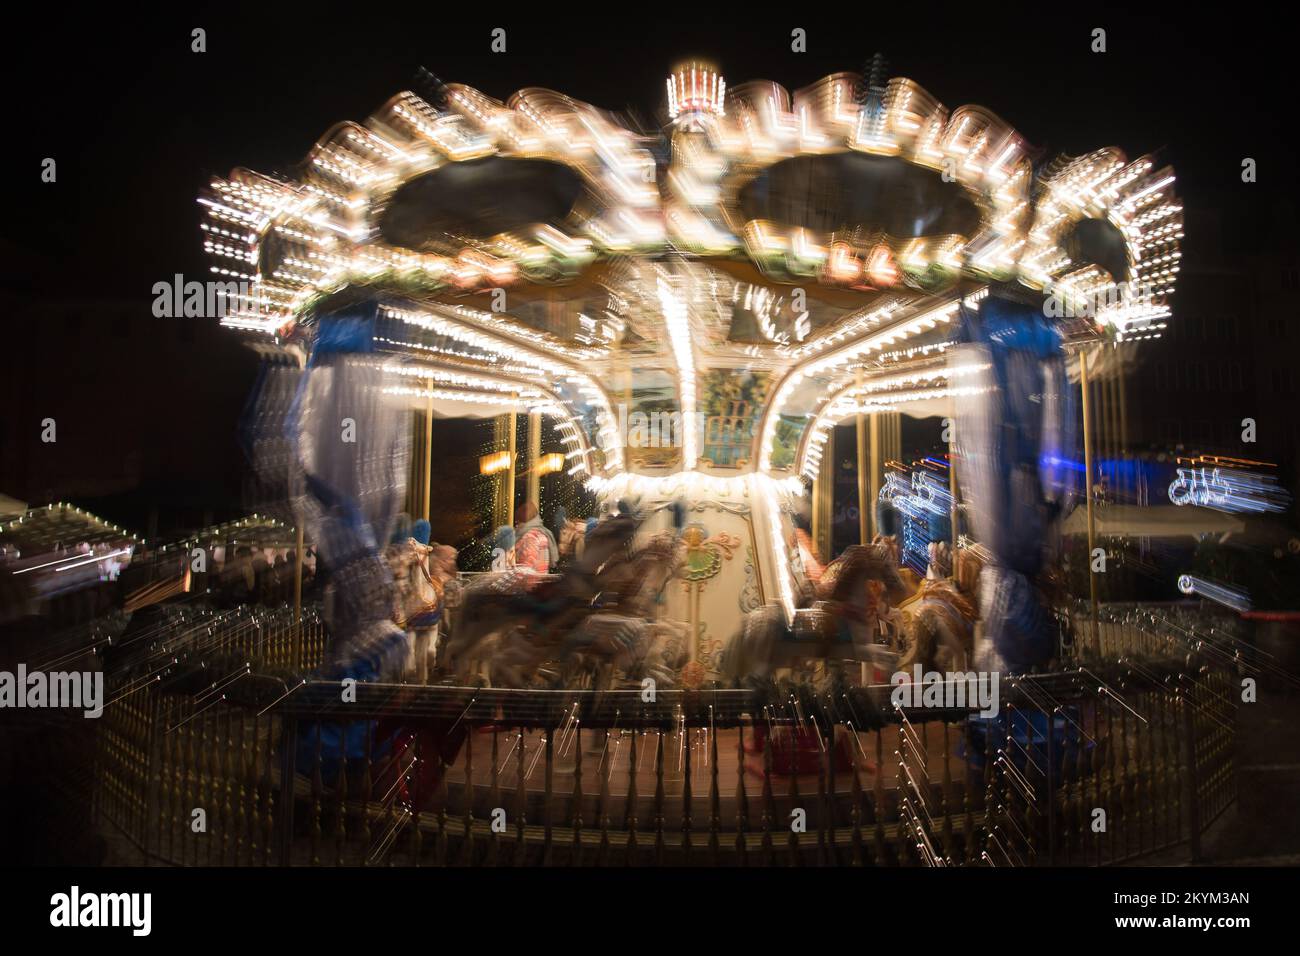 Christmas Fair and Christmas decorations in Old Town in Gdansk, Poland © Wojciech Strozyk / Alamy Stock Photo Stock Photo